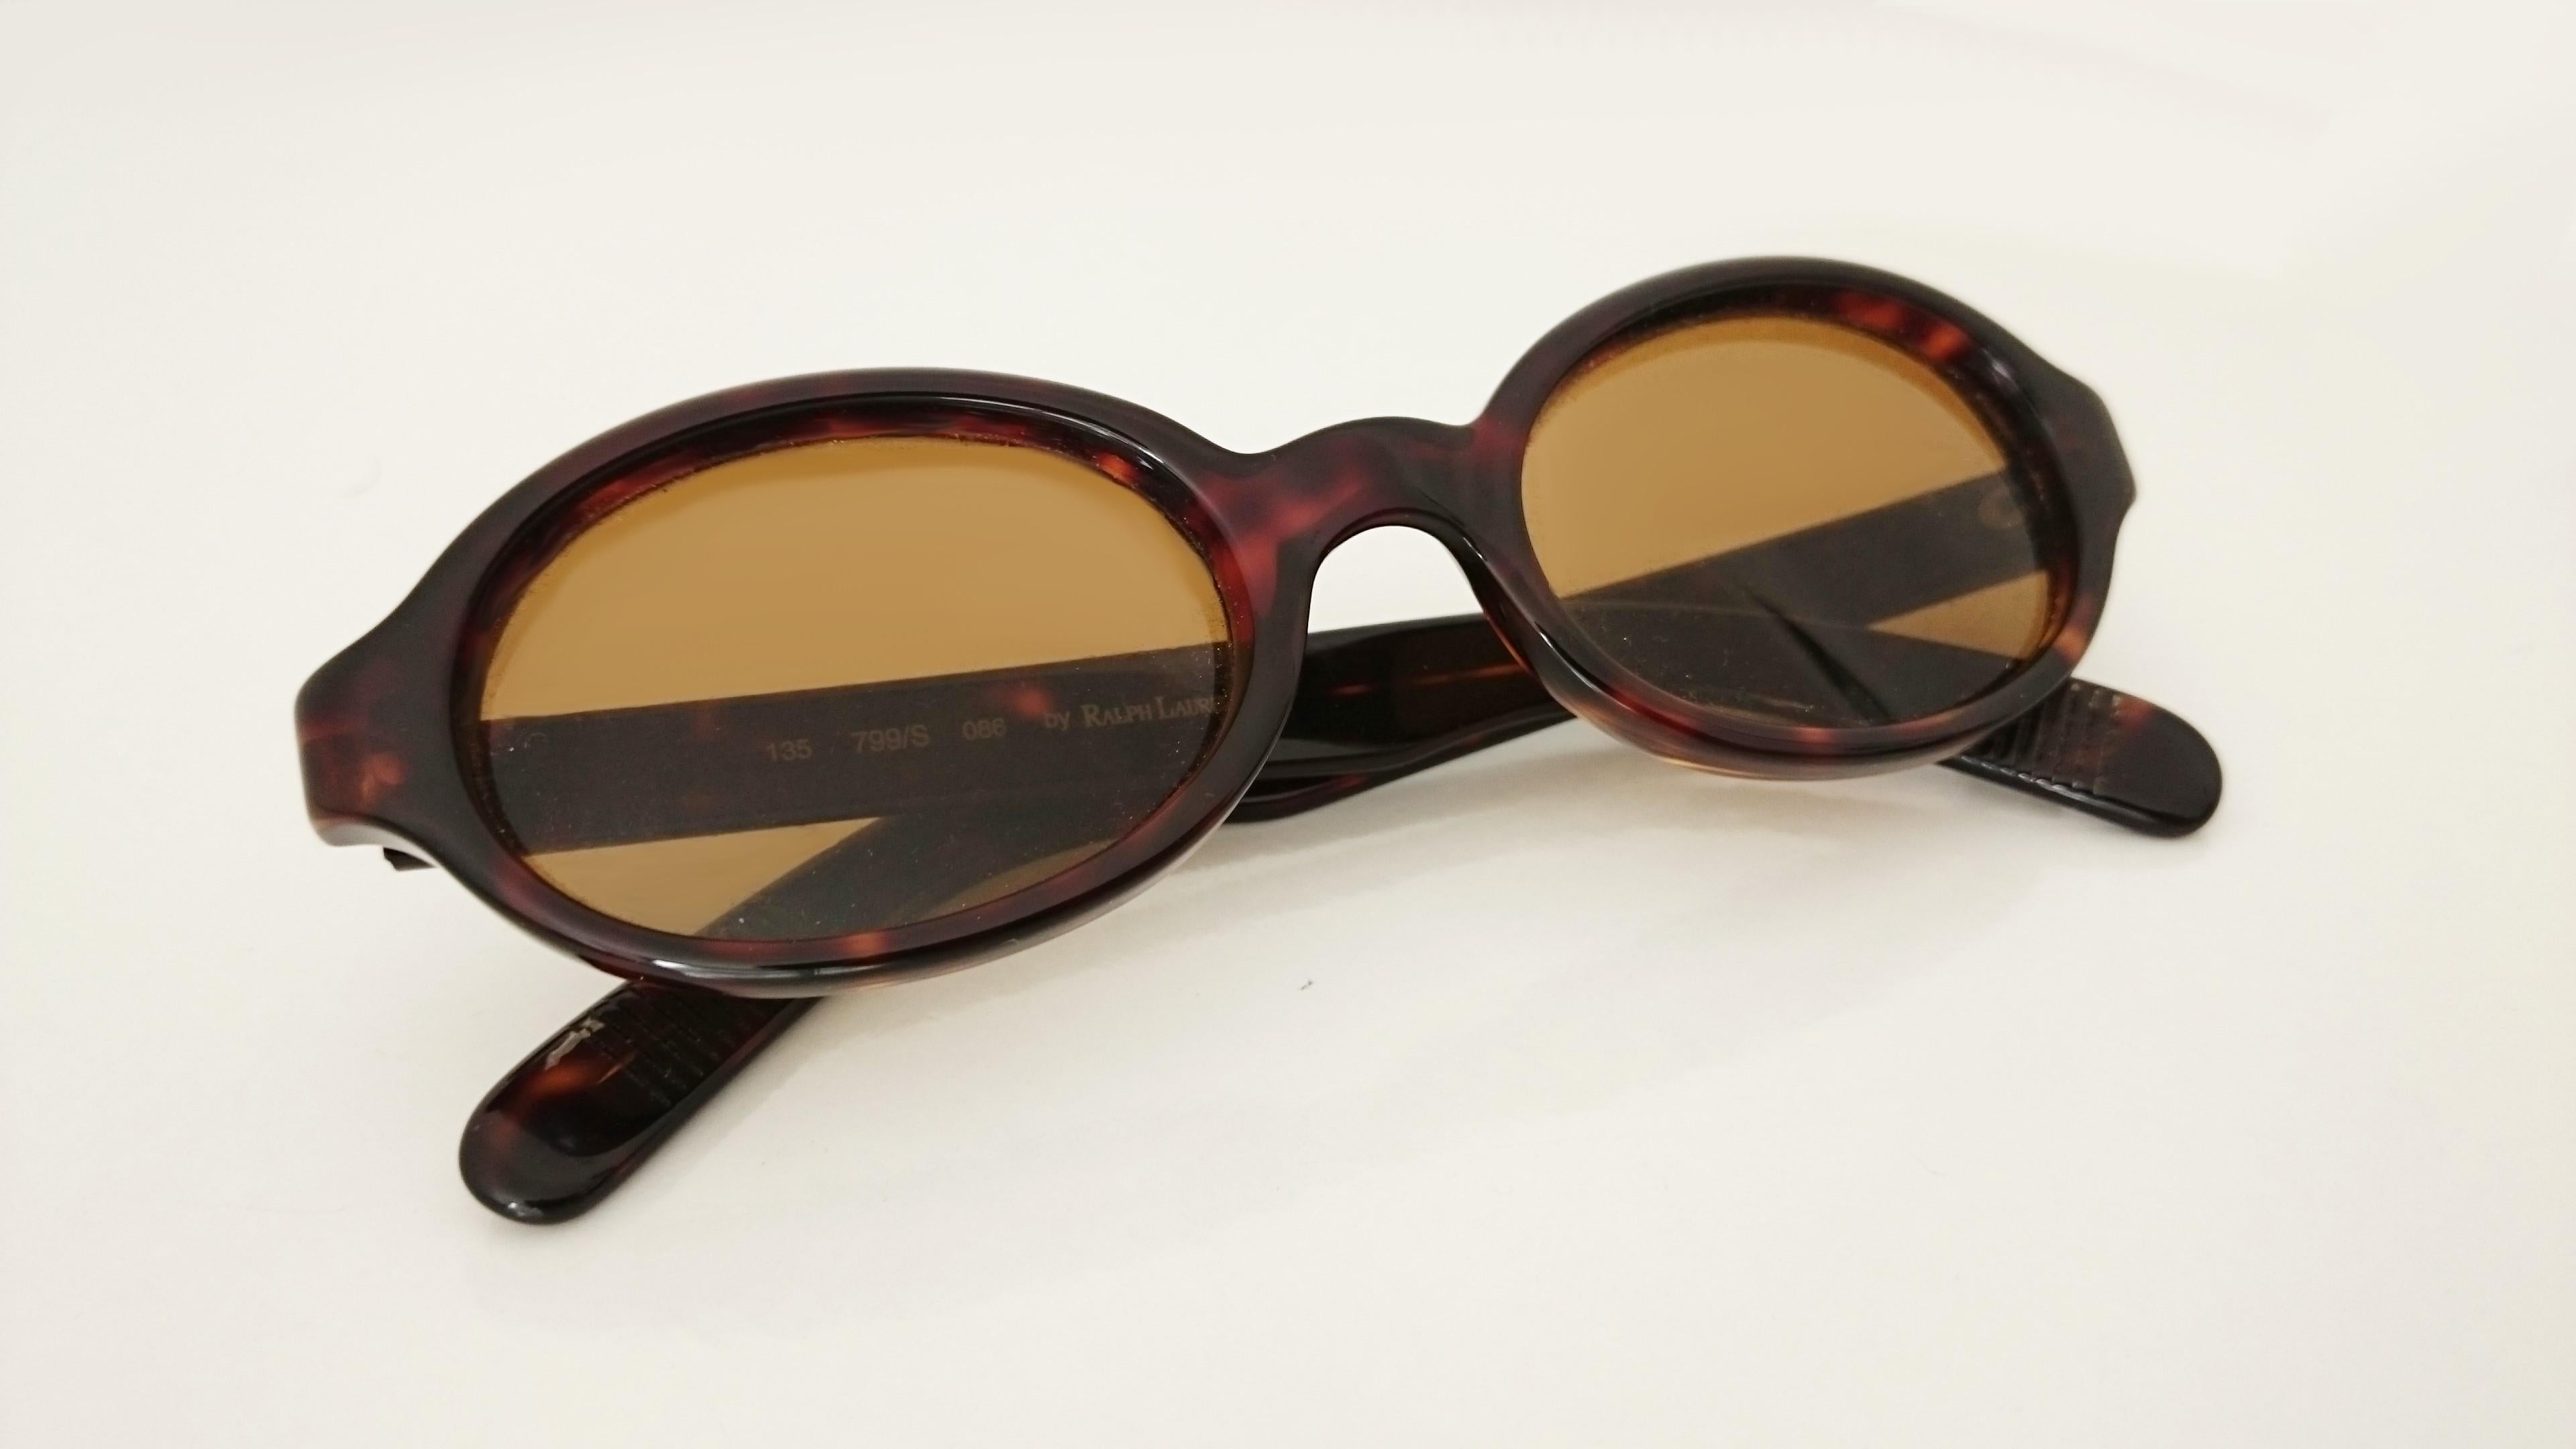 Polo Ralph Lauren Brown Oval Vintage Sunglasses 
Brown
No graduation
Length: 14 cm
Great conditions.
Made in Italy